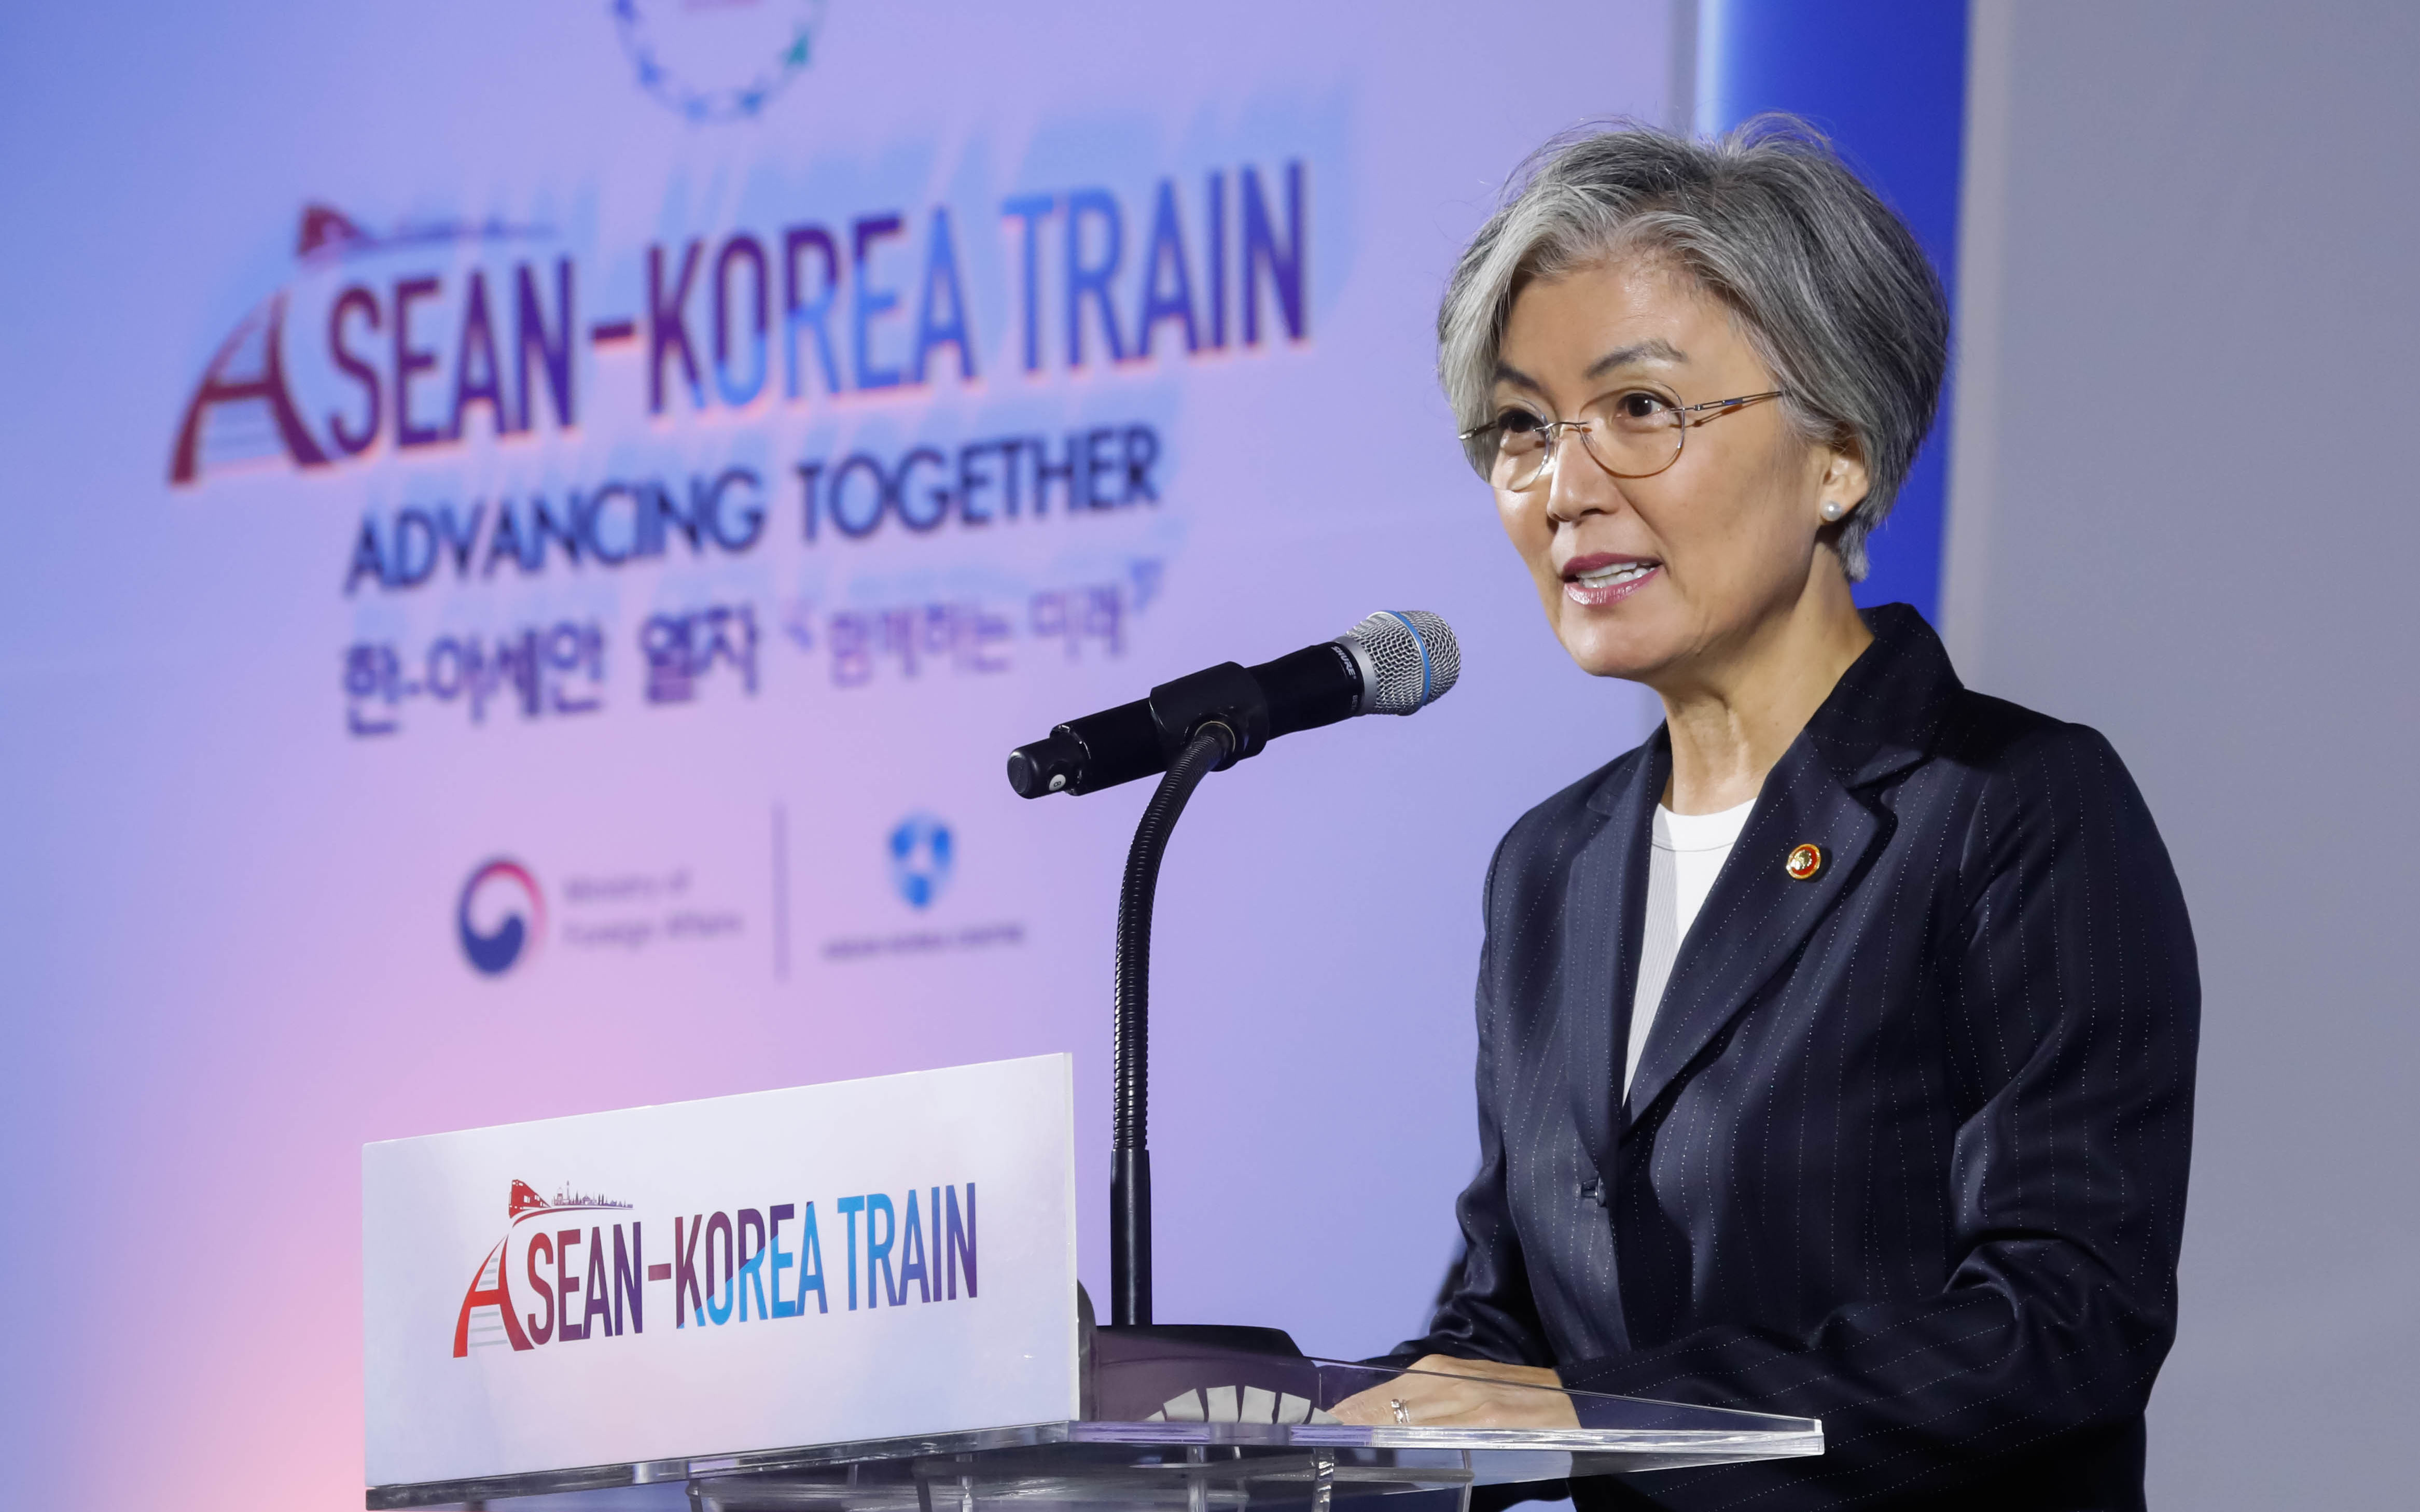 Korean Foreign Minister Kang Kyung-wha on Oct. 18 gives a speech at the ASEAN-Korea Train's closing ceremony congratulating a successful tour.